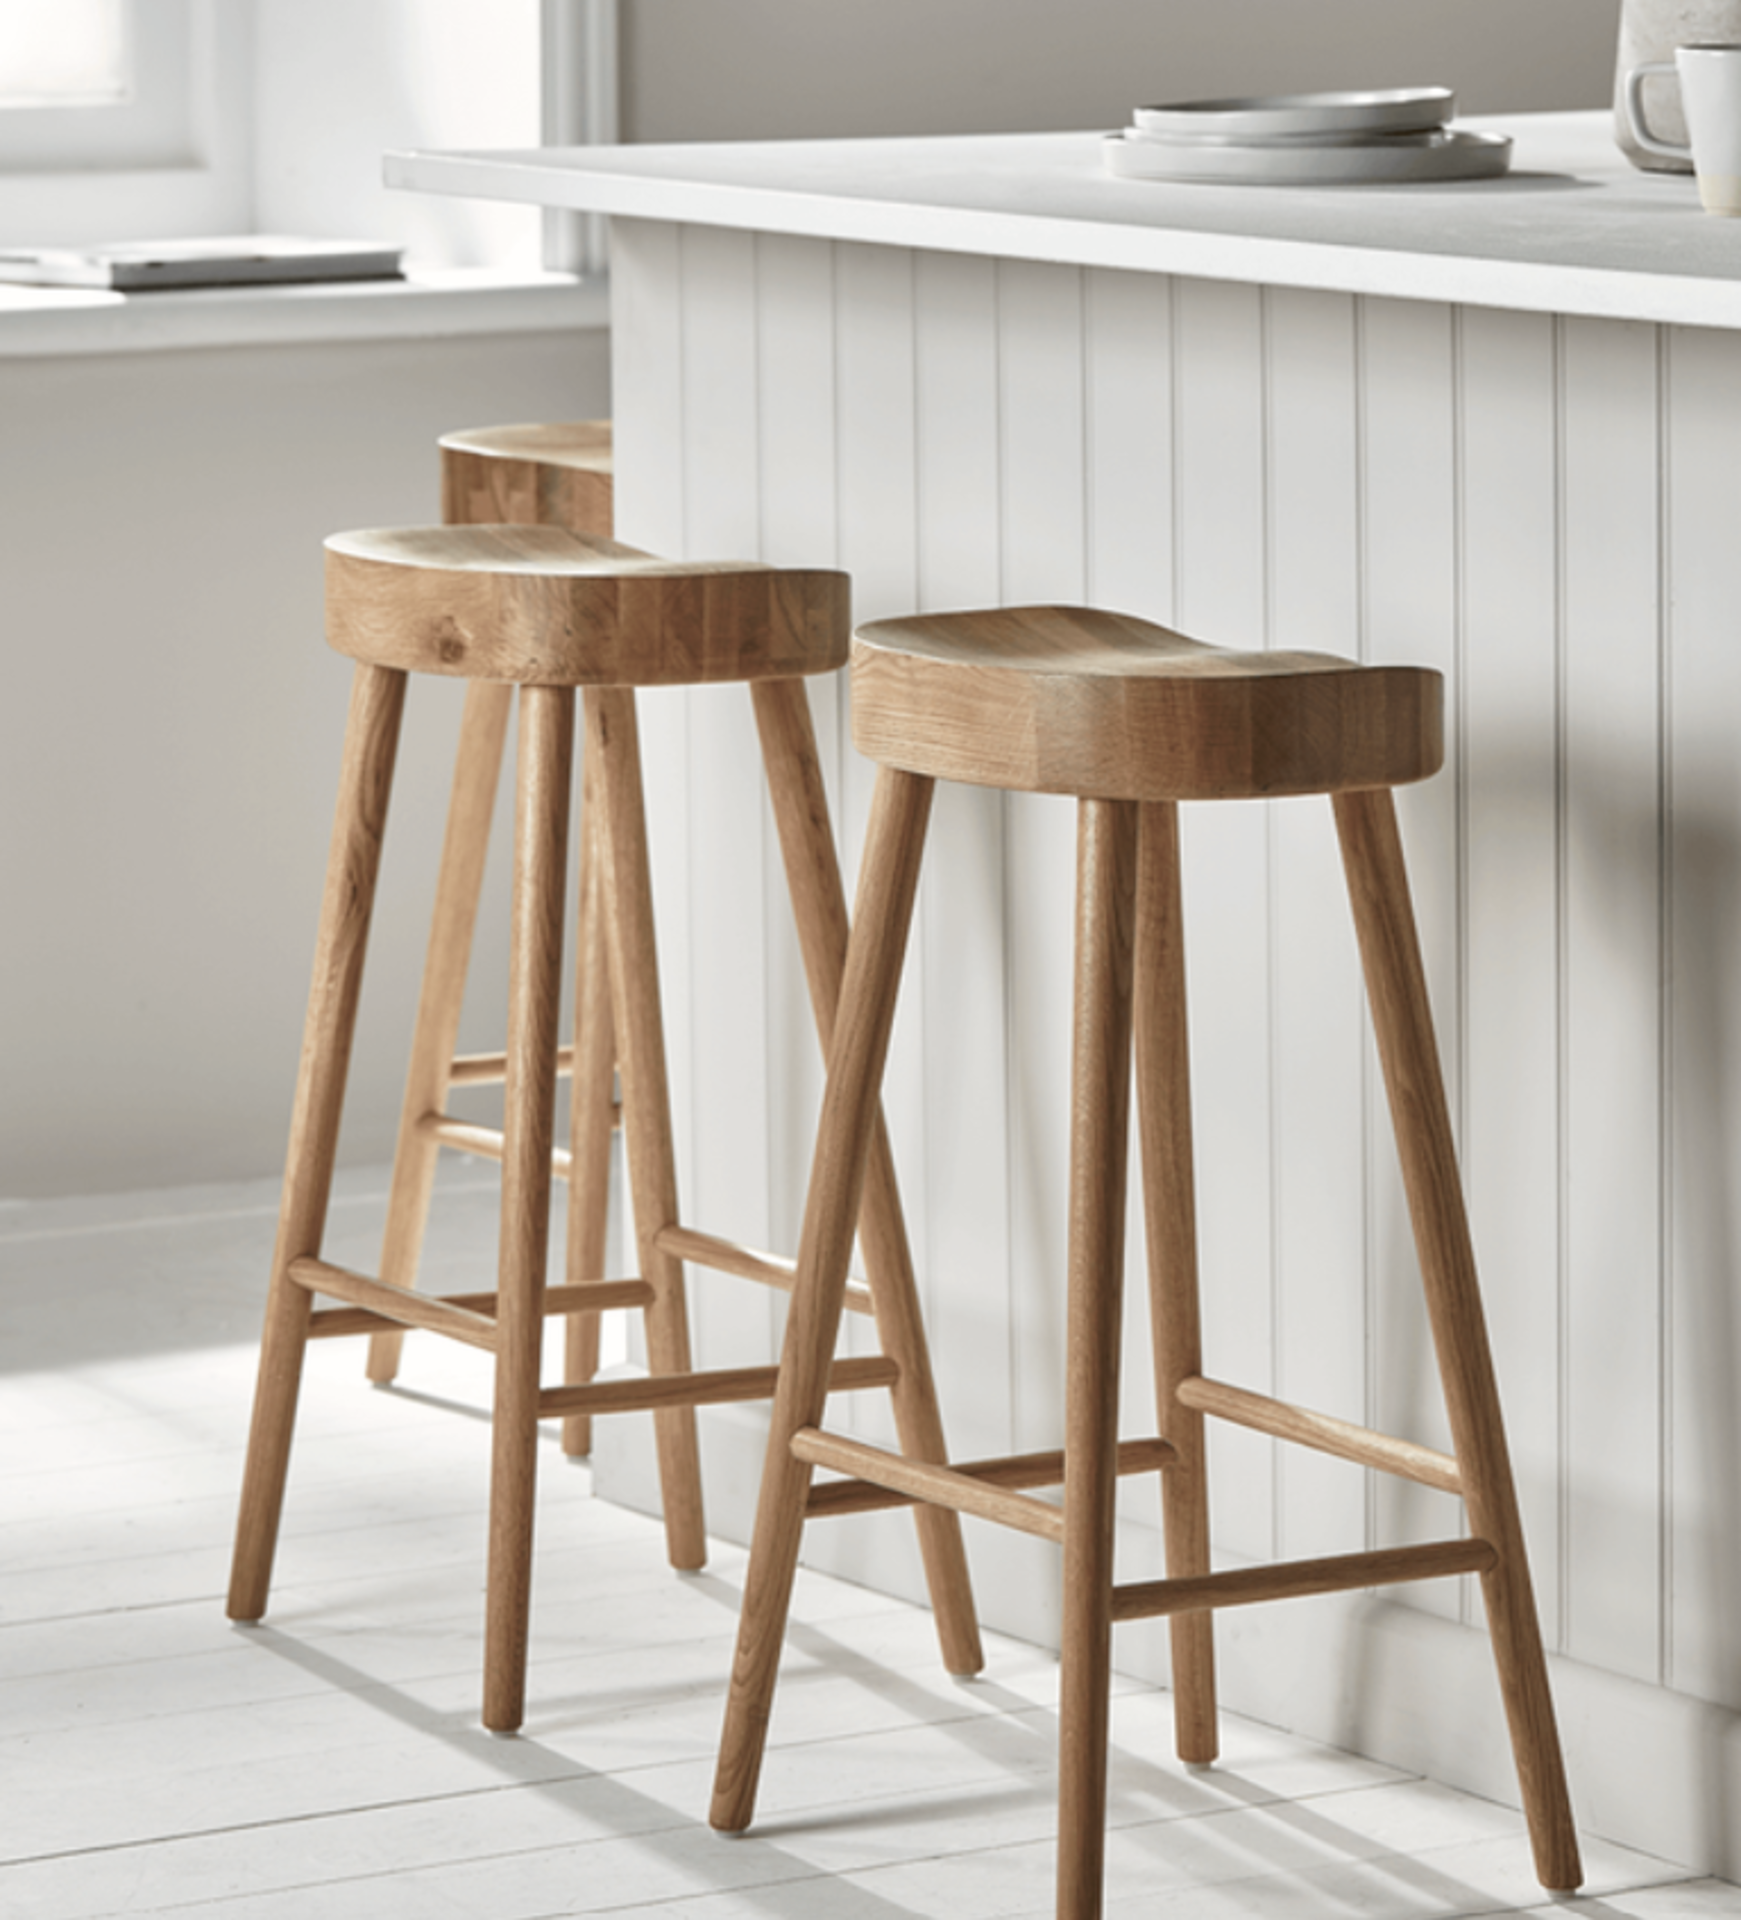 Weathered Oak Counter Stool - Natural. RRP £325.00. Our stool has been designed to be the perfect